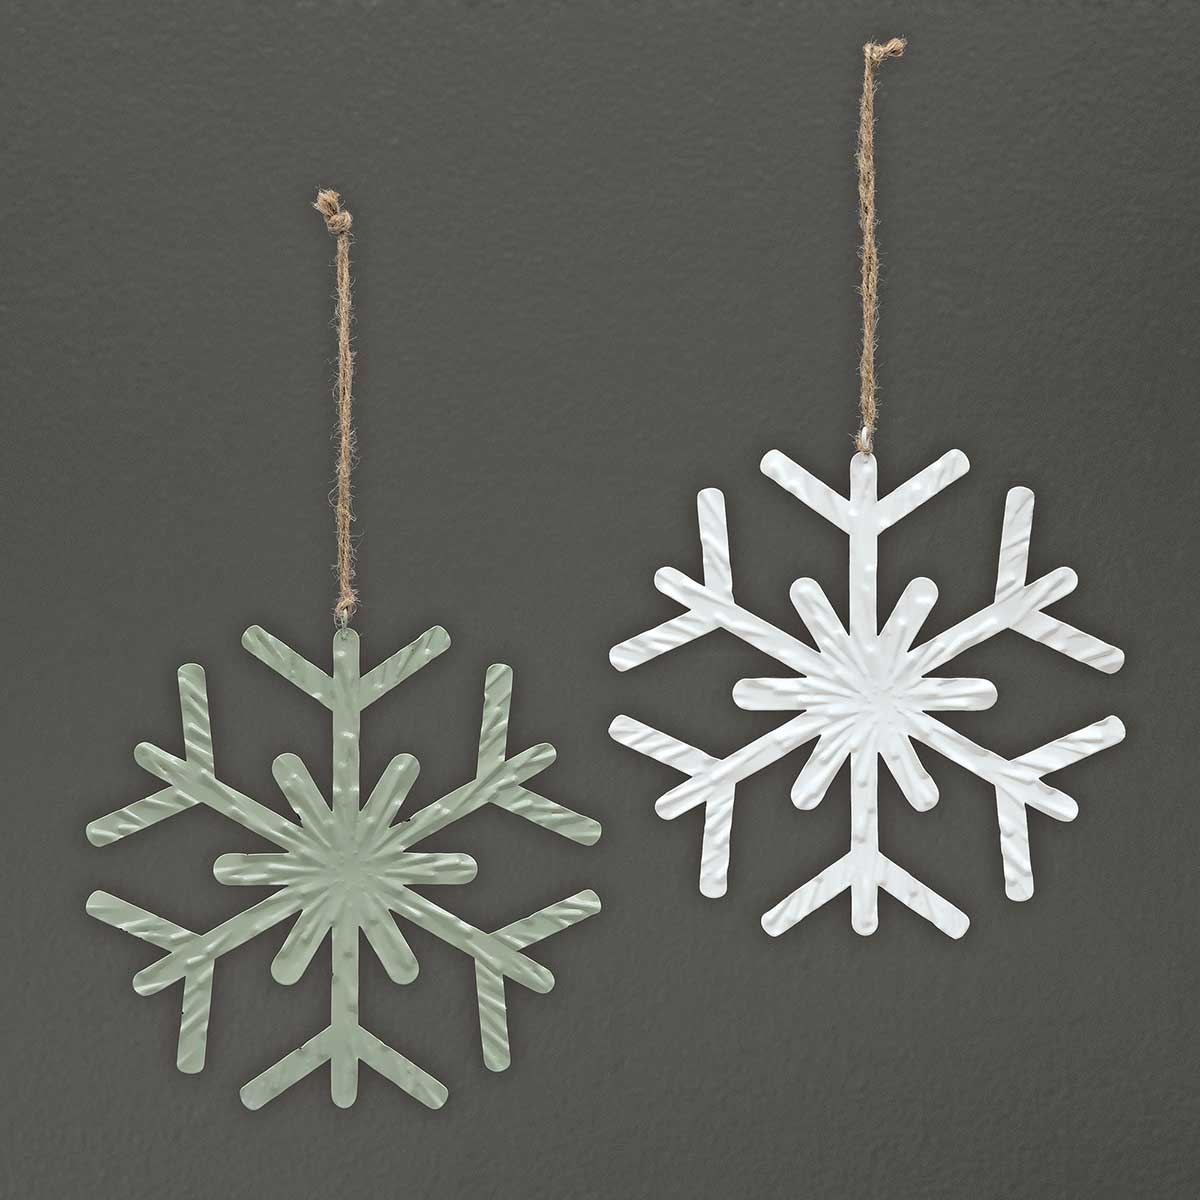 METAL TEXTURED SNOWFLAKE ORNAMENT 2 ASSORTED